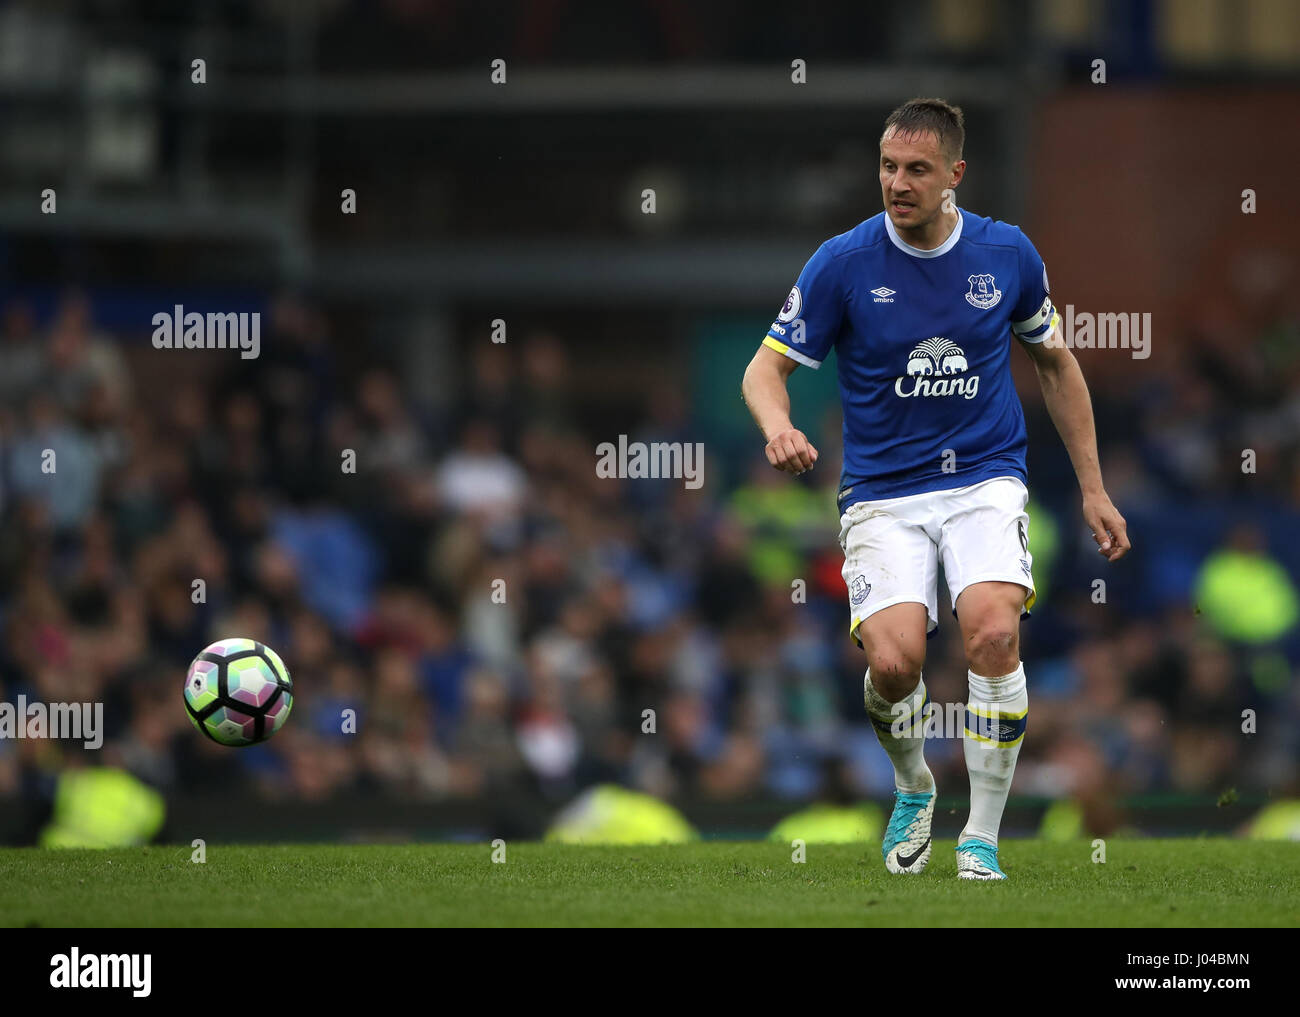 Everton's Phil Jagielka during the Premier League match at Goodison Park, Liverpool. PRESS ASSOCIATION Photo. Picture date: Sunday April 9, 2017. See PA story SOCCER Everton. Photo credit should read: Nick Potts/PA Wire. RESTRICTIONS: No use with unauthorised audio, video, data, fixture lists, club/league logos or 'live' services. Online in-match use limited to 75 images, no video emulation. No use in betting, games or single club/league/player publications. Stock Photo